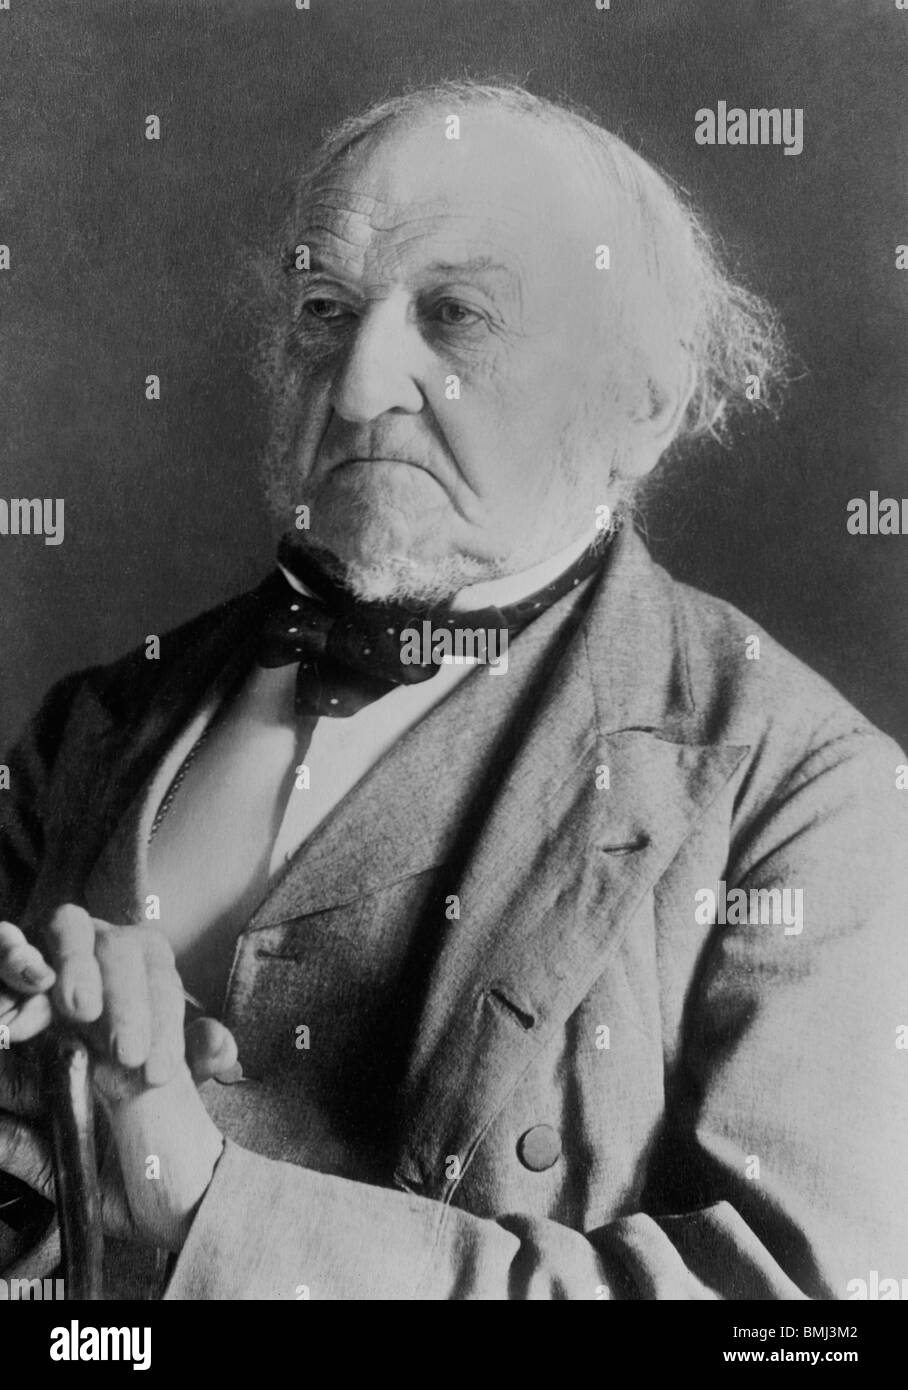 Photo c1880s of William Ewart Gladstone (1809 - 1898) - a Liberal Party statesman who was UK Prime Minister on four occasions. Stock Photo